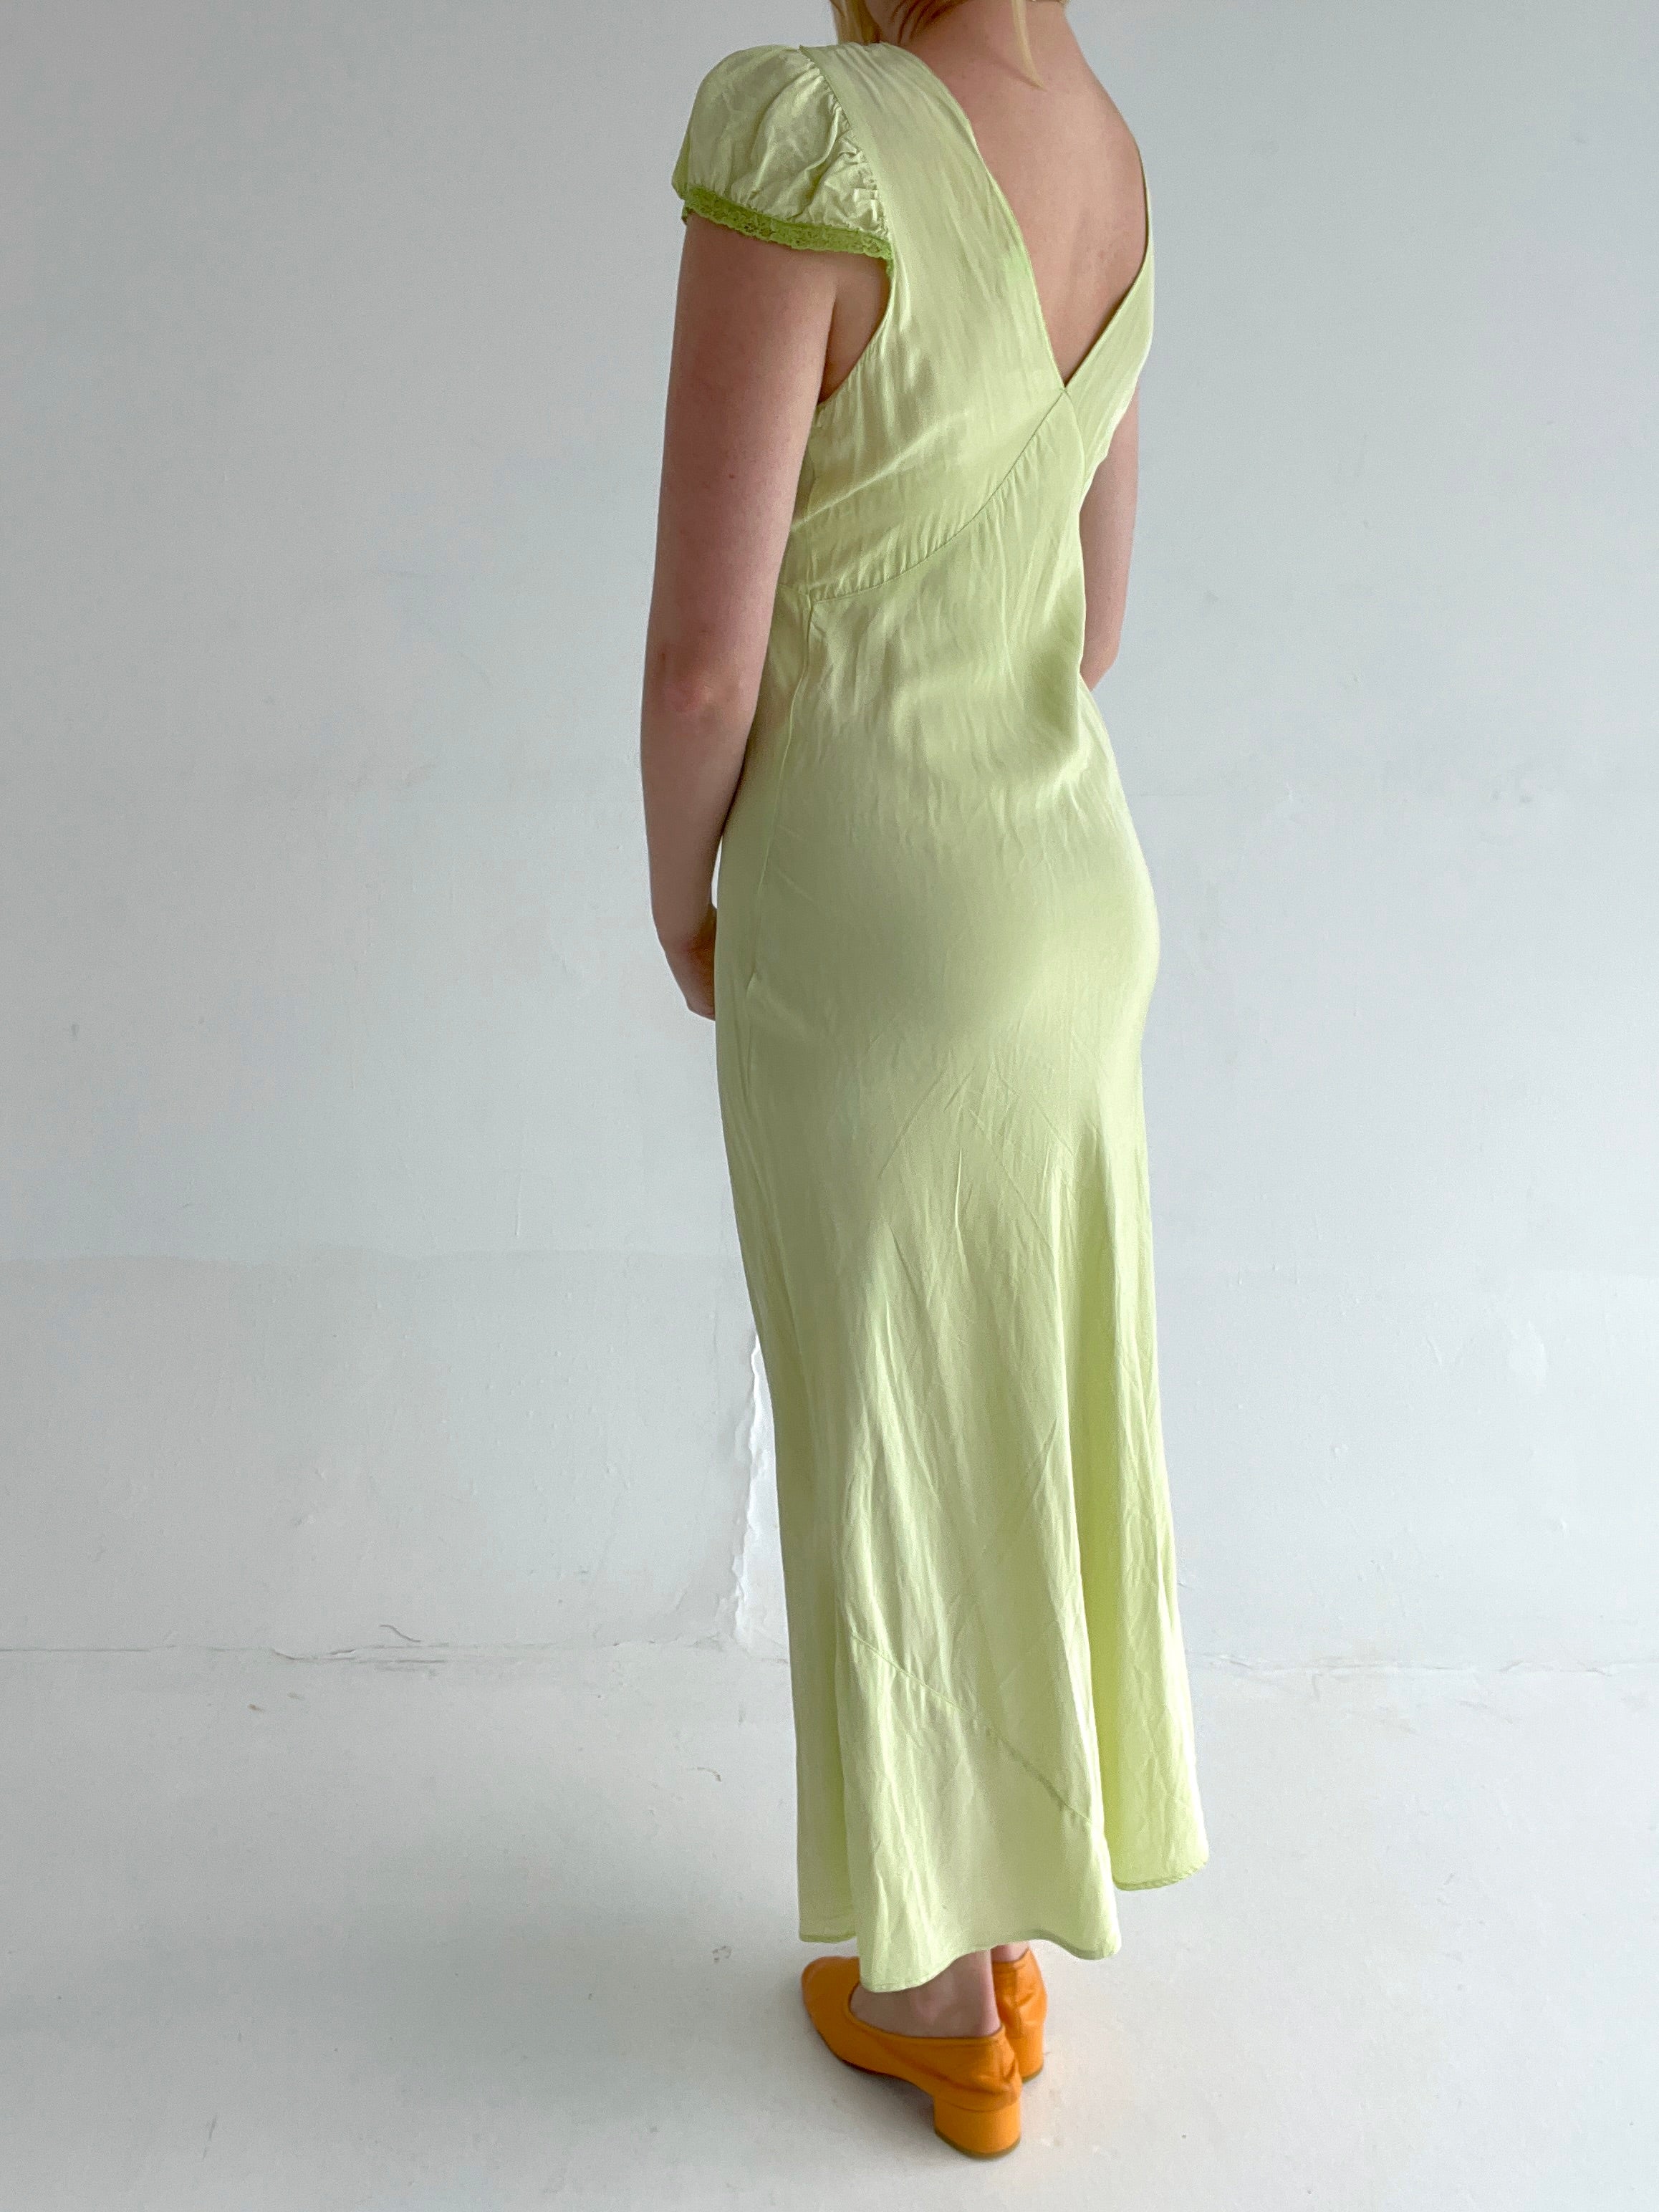 Hand Dyed Grassy Green Slip with Cap Sleeve